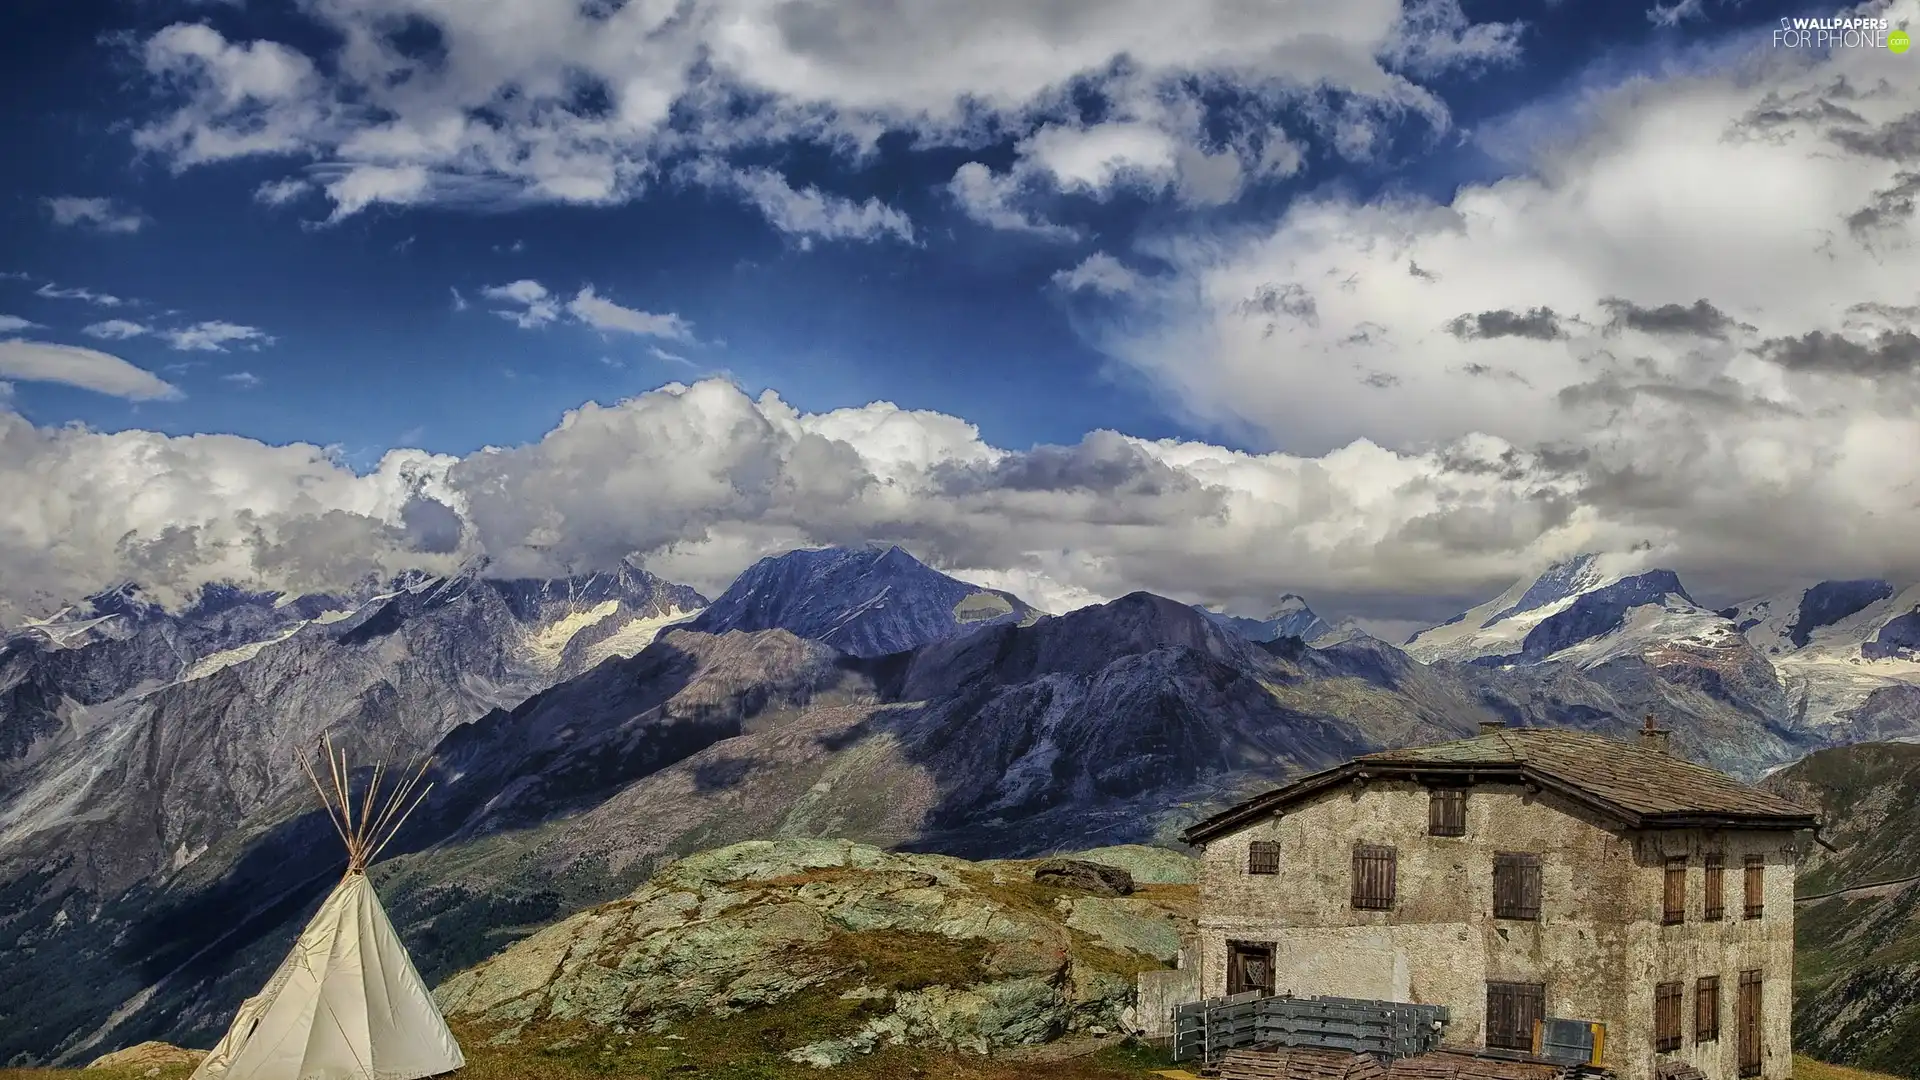 Alps, Switzerland, Mountains, clouds, house